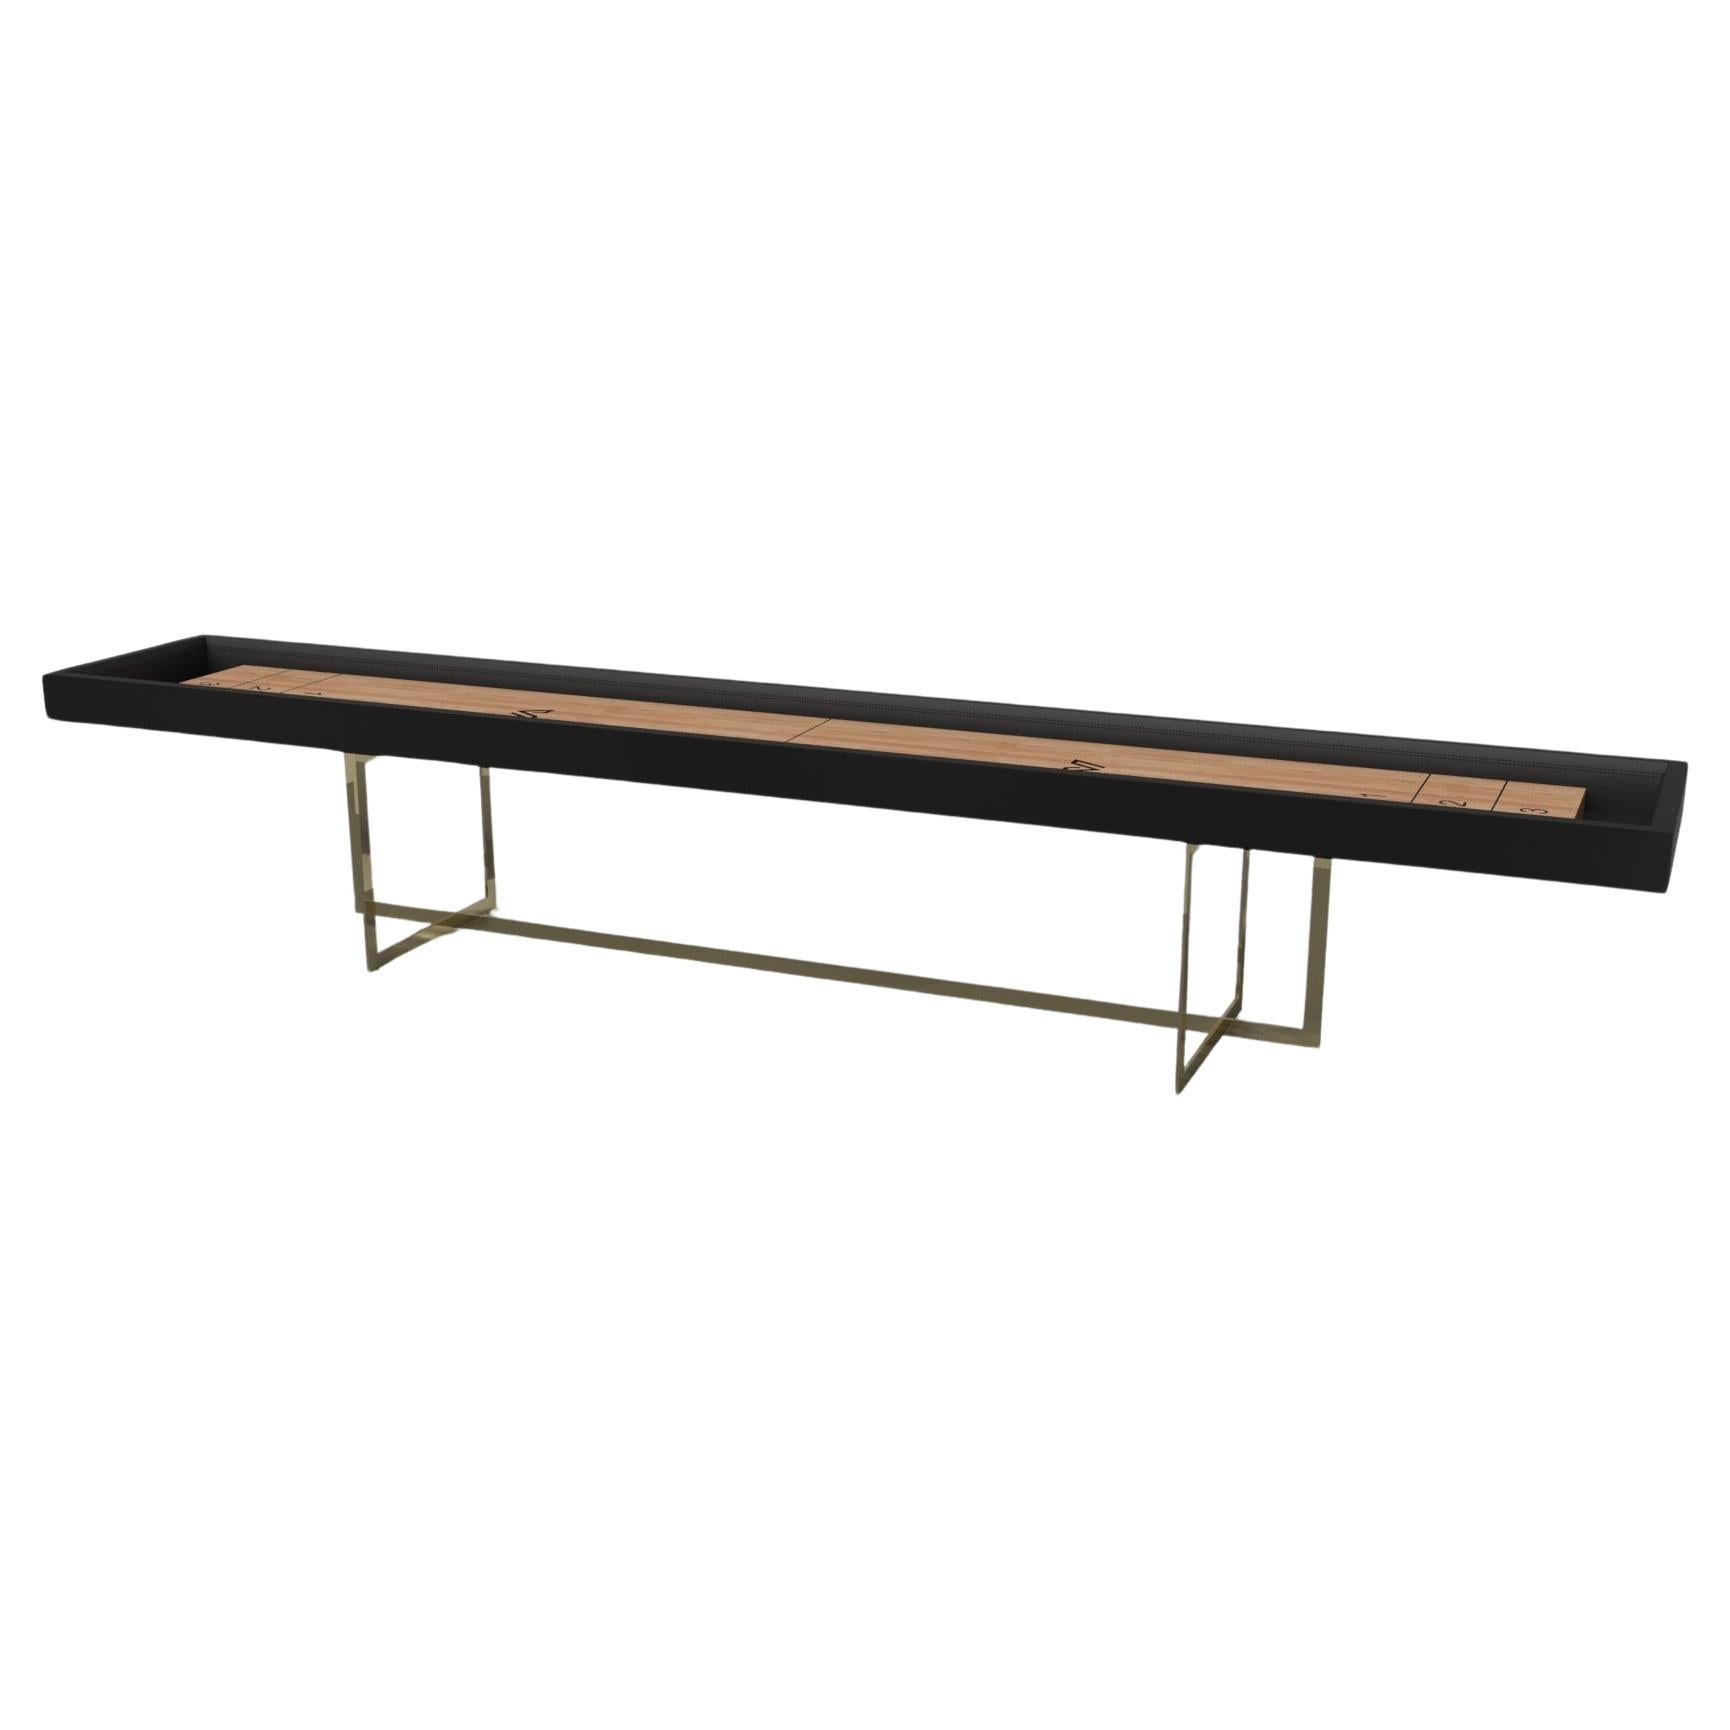 Elevate Customs Beso Shuffleboard Tables/Brass Stainless Steel Metal in 16' -USA